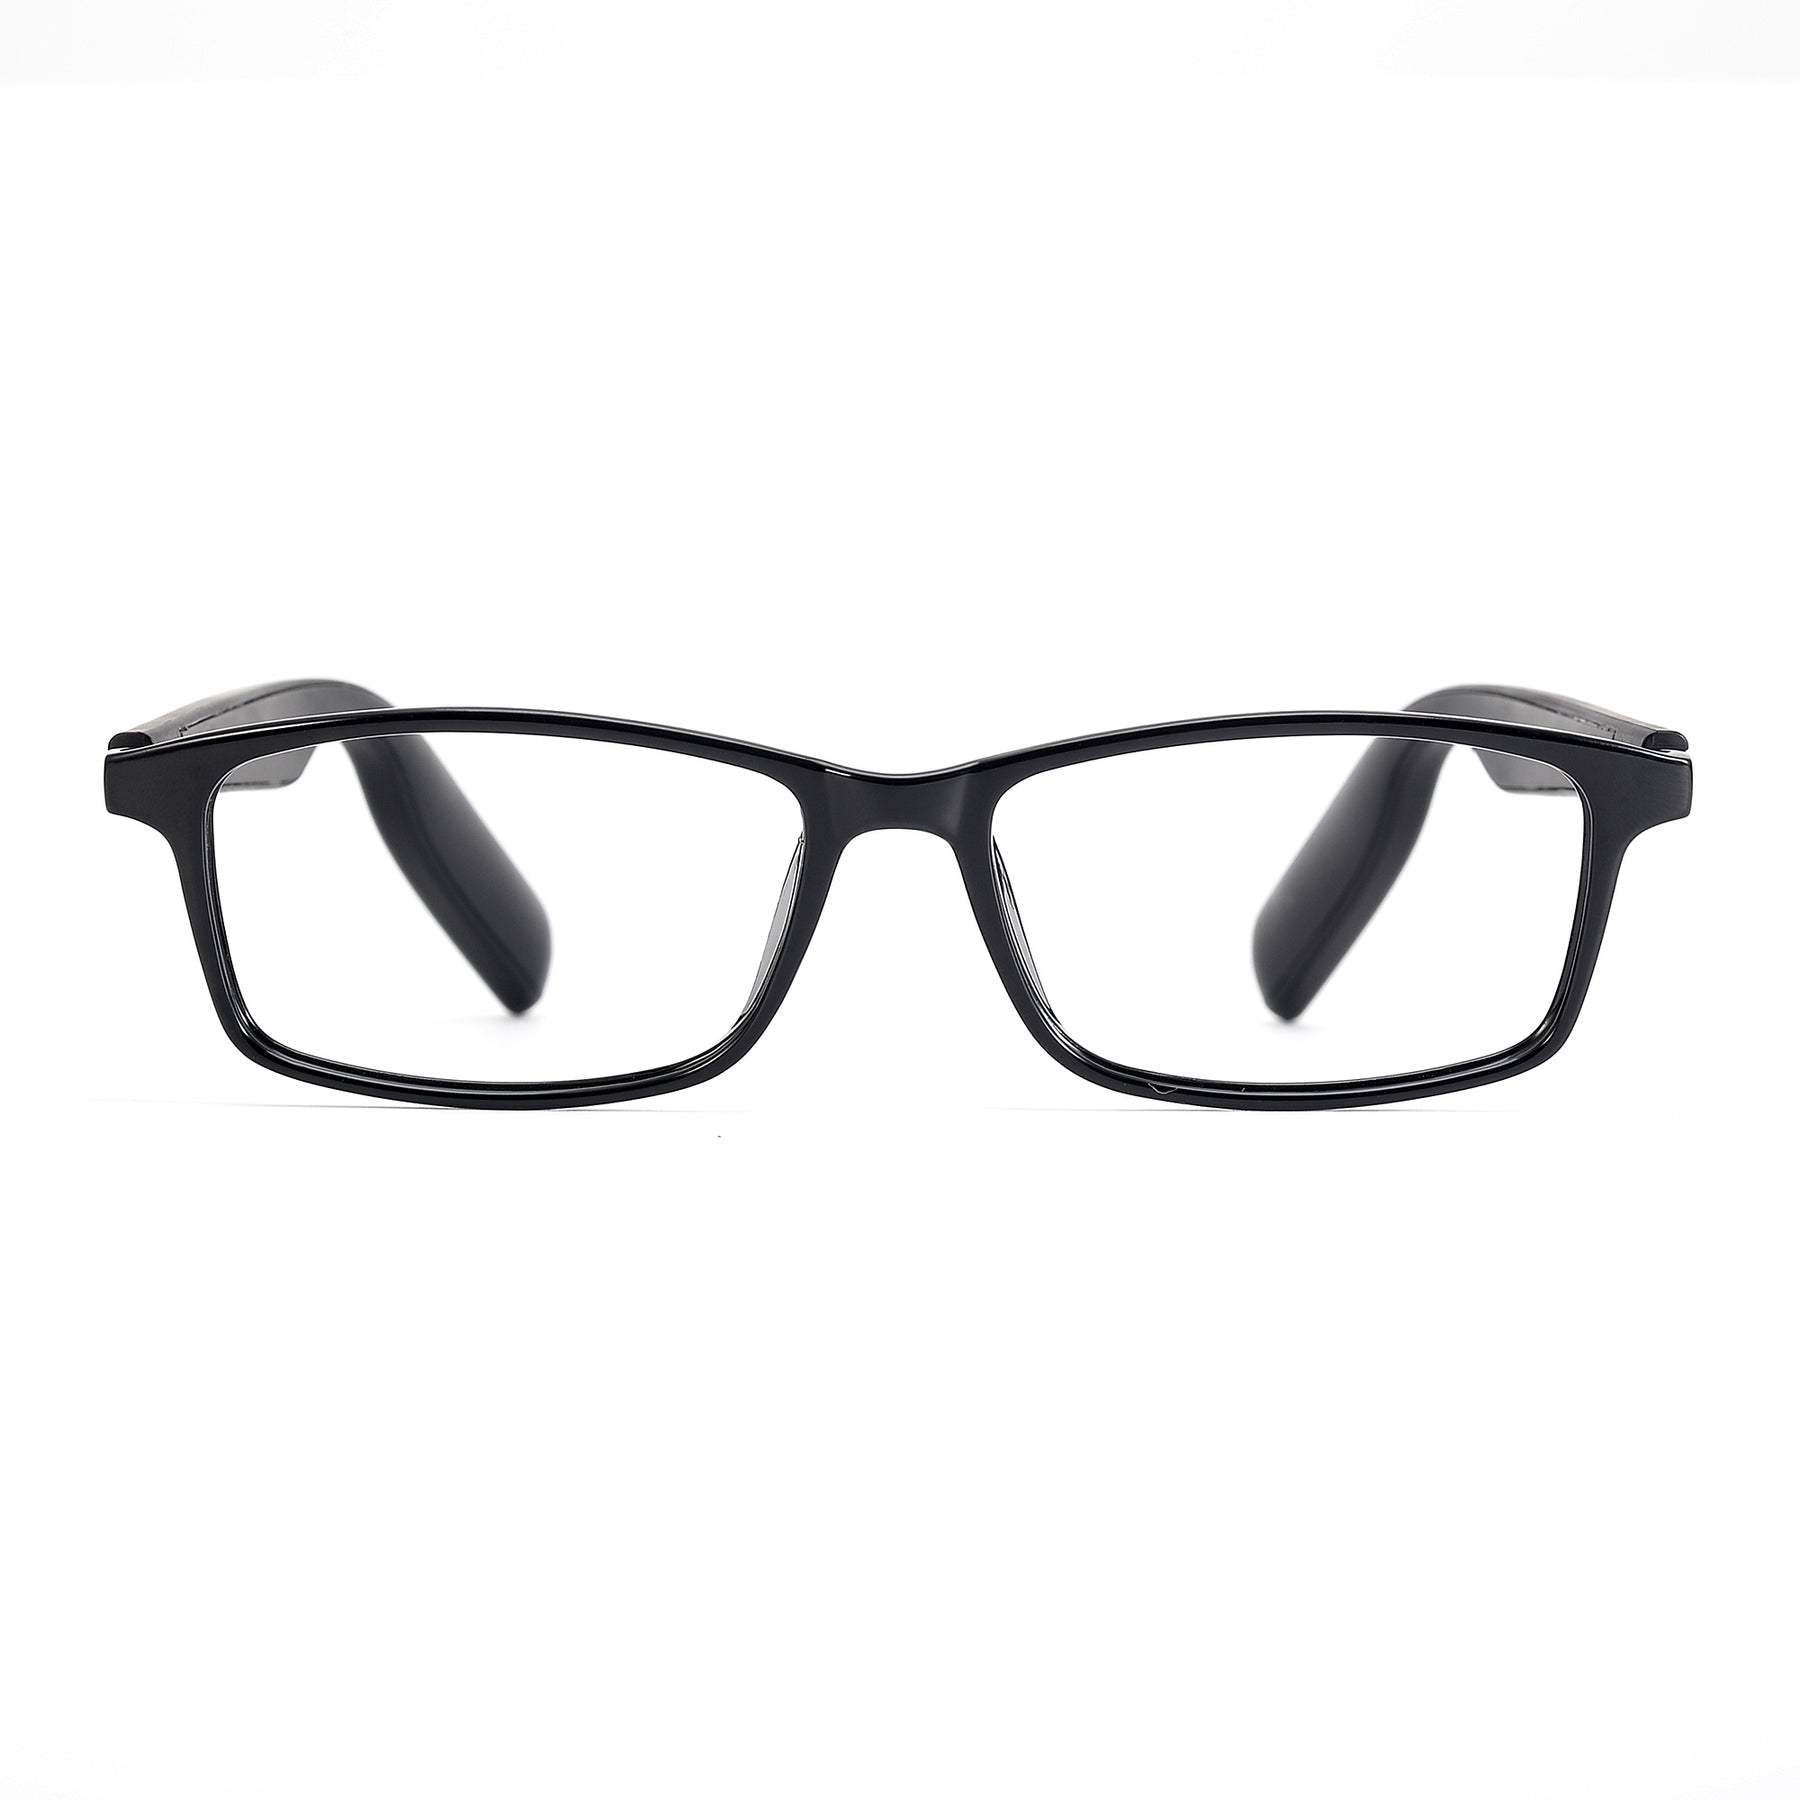 Bluetooth Reading Glasses With Easy-Swap Front Frame, Open-Ear IP67 ...